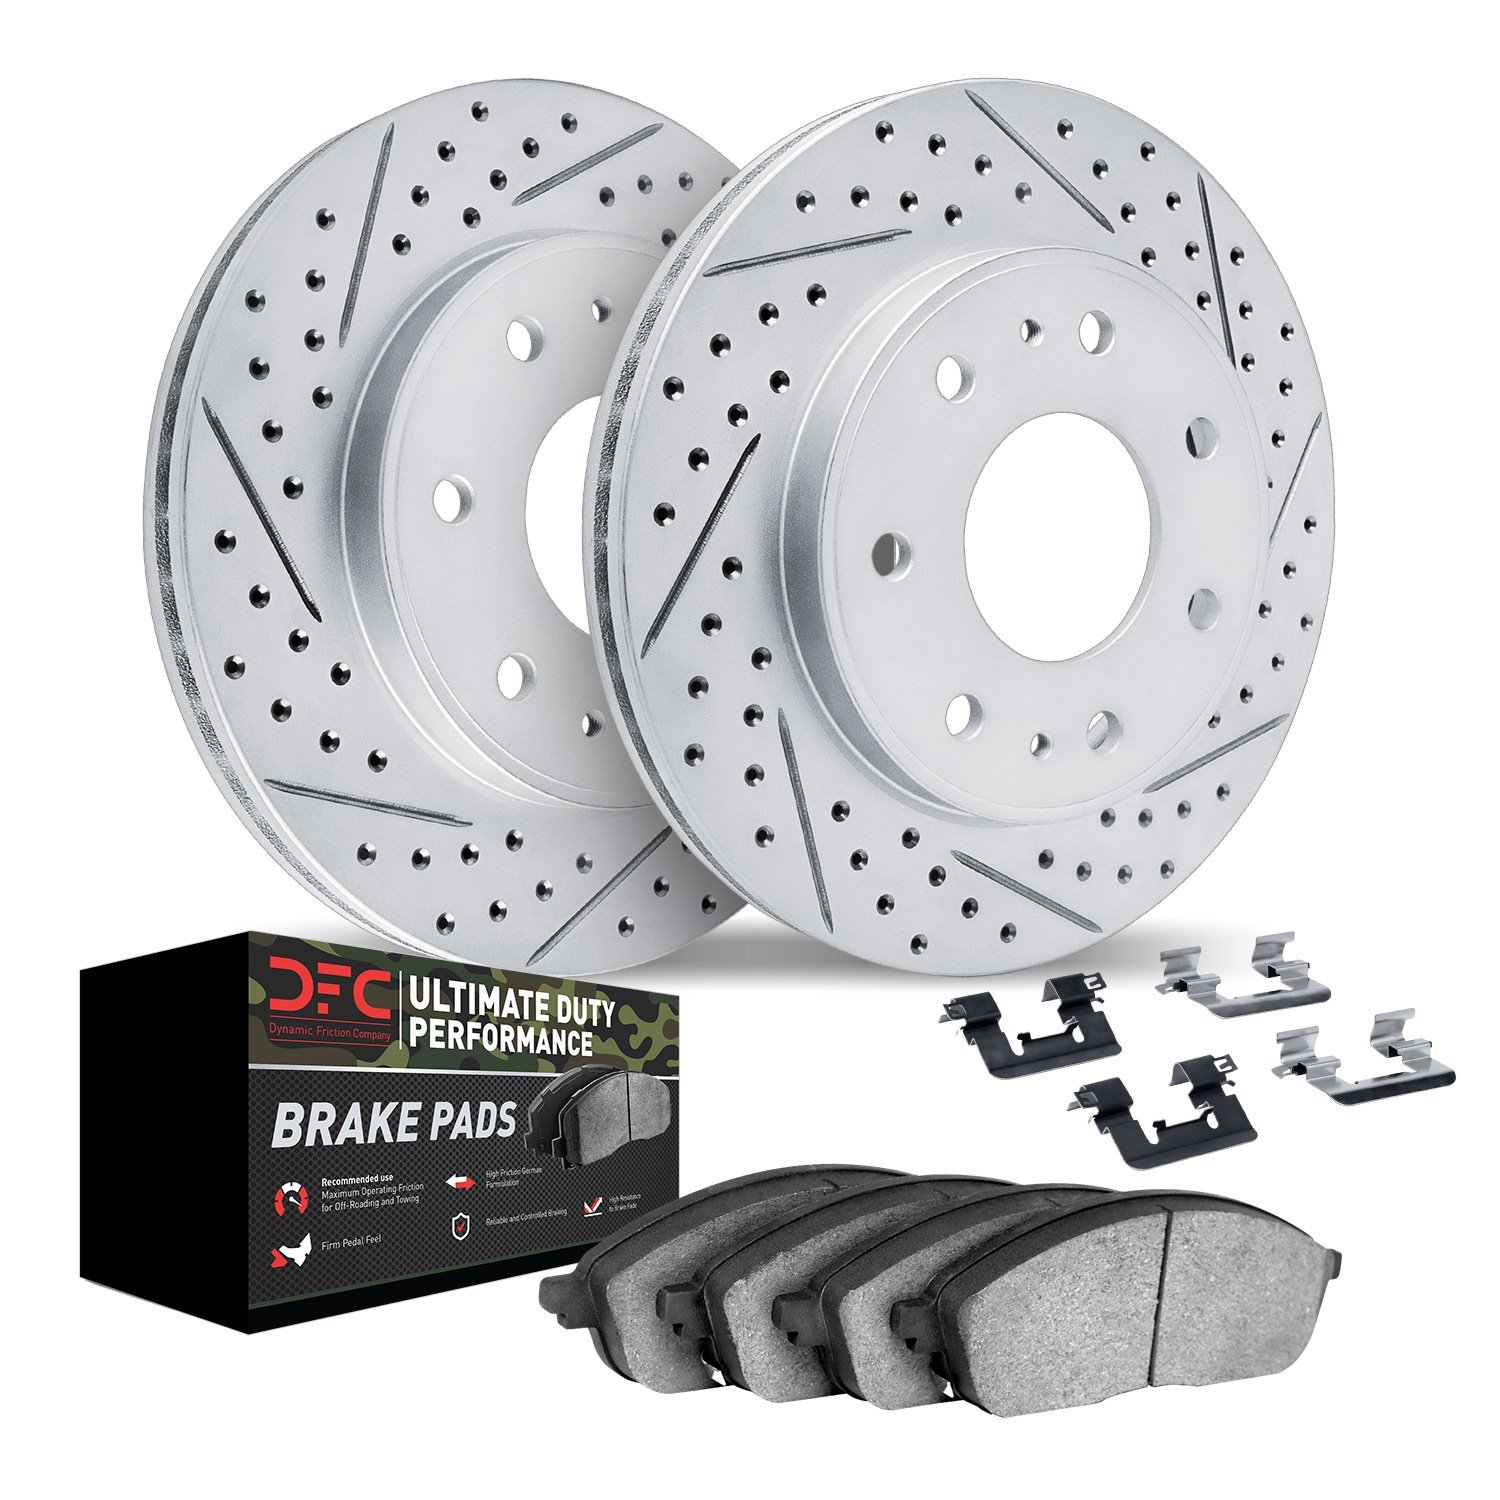 2412-54050 Geoperformance Drilled/Slotted Brake Rotors with Ultimate-Duty Brake Pads Kit & Hardware, 2004-2011 Ford/Lincoln/Merc